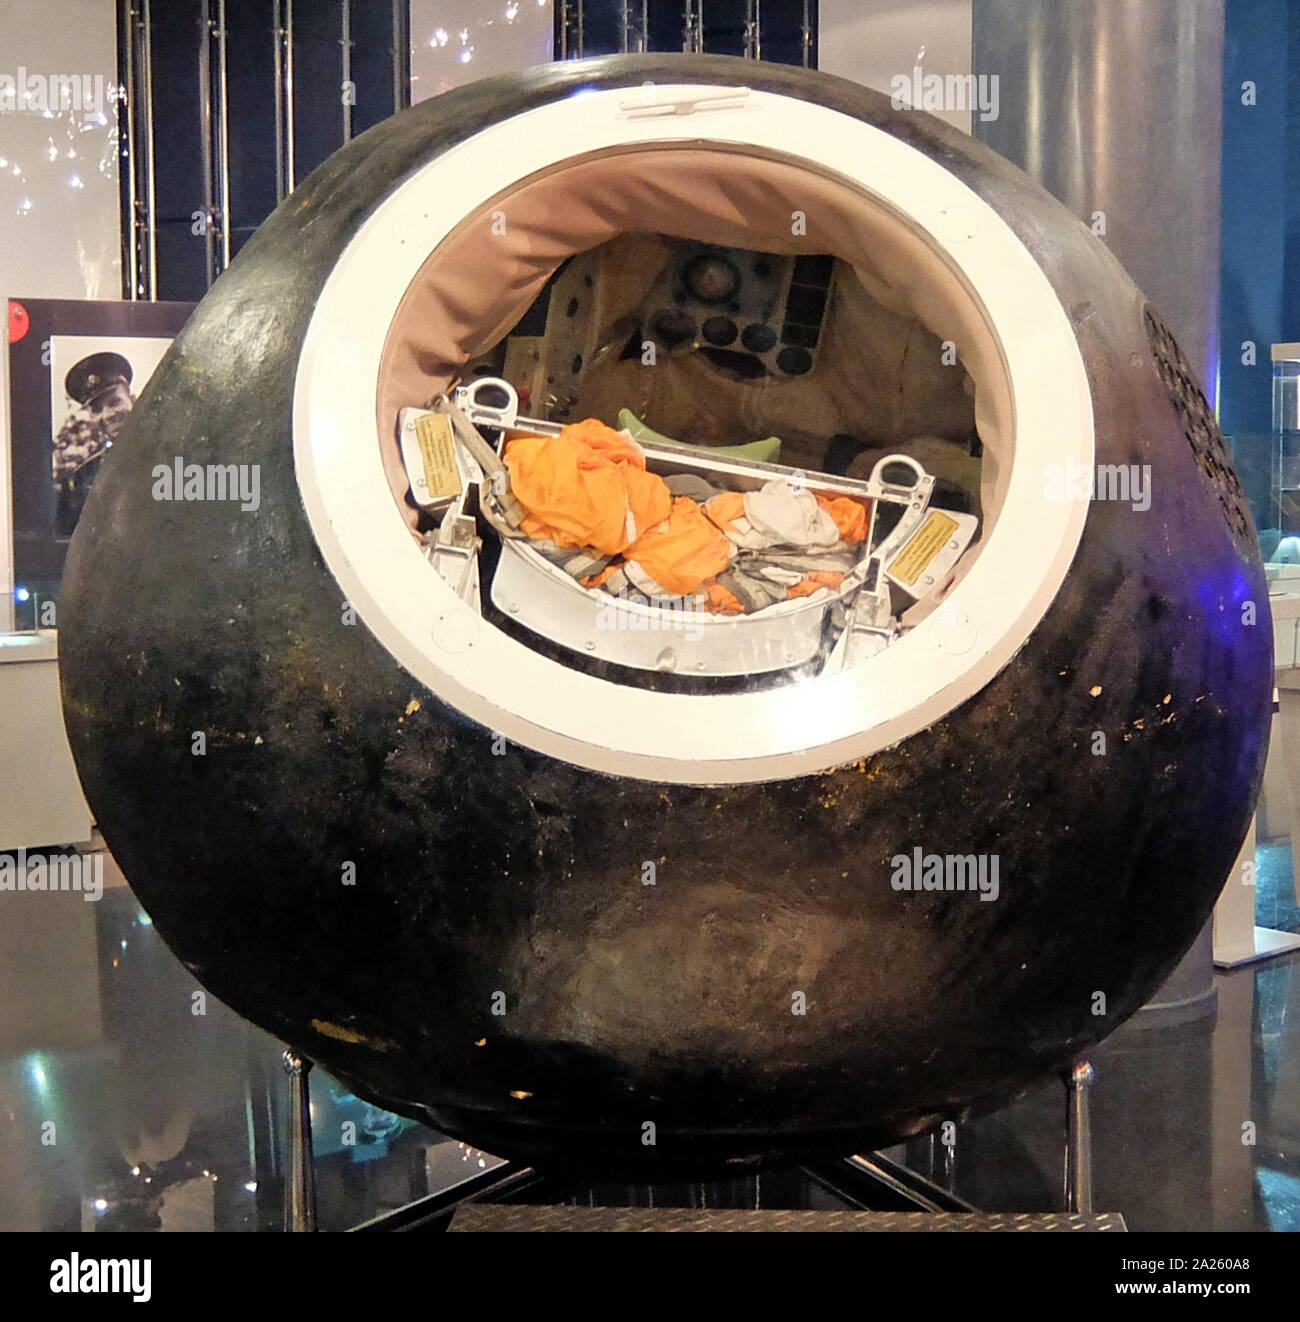 cosmonaut module from the Soviet Russian (USSR), Vostok-K spacecraft, launched in 1960, to carry Yuri Gagarin the first human to fly in space Stock Photo